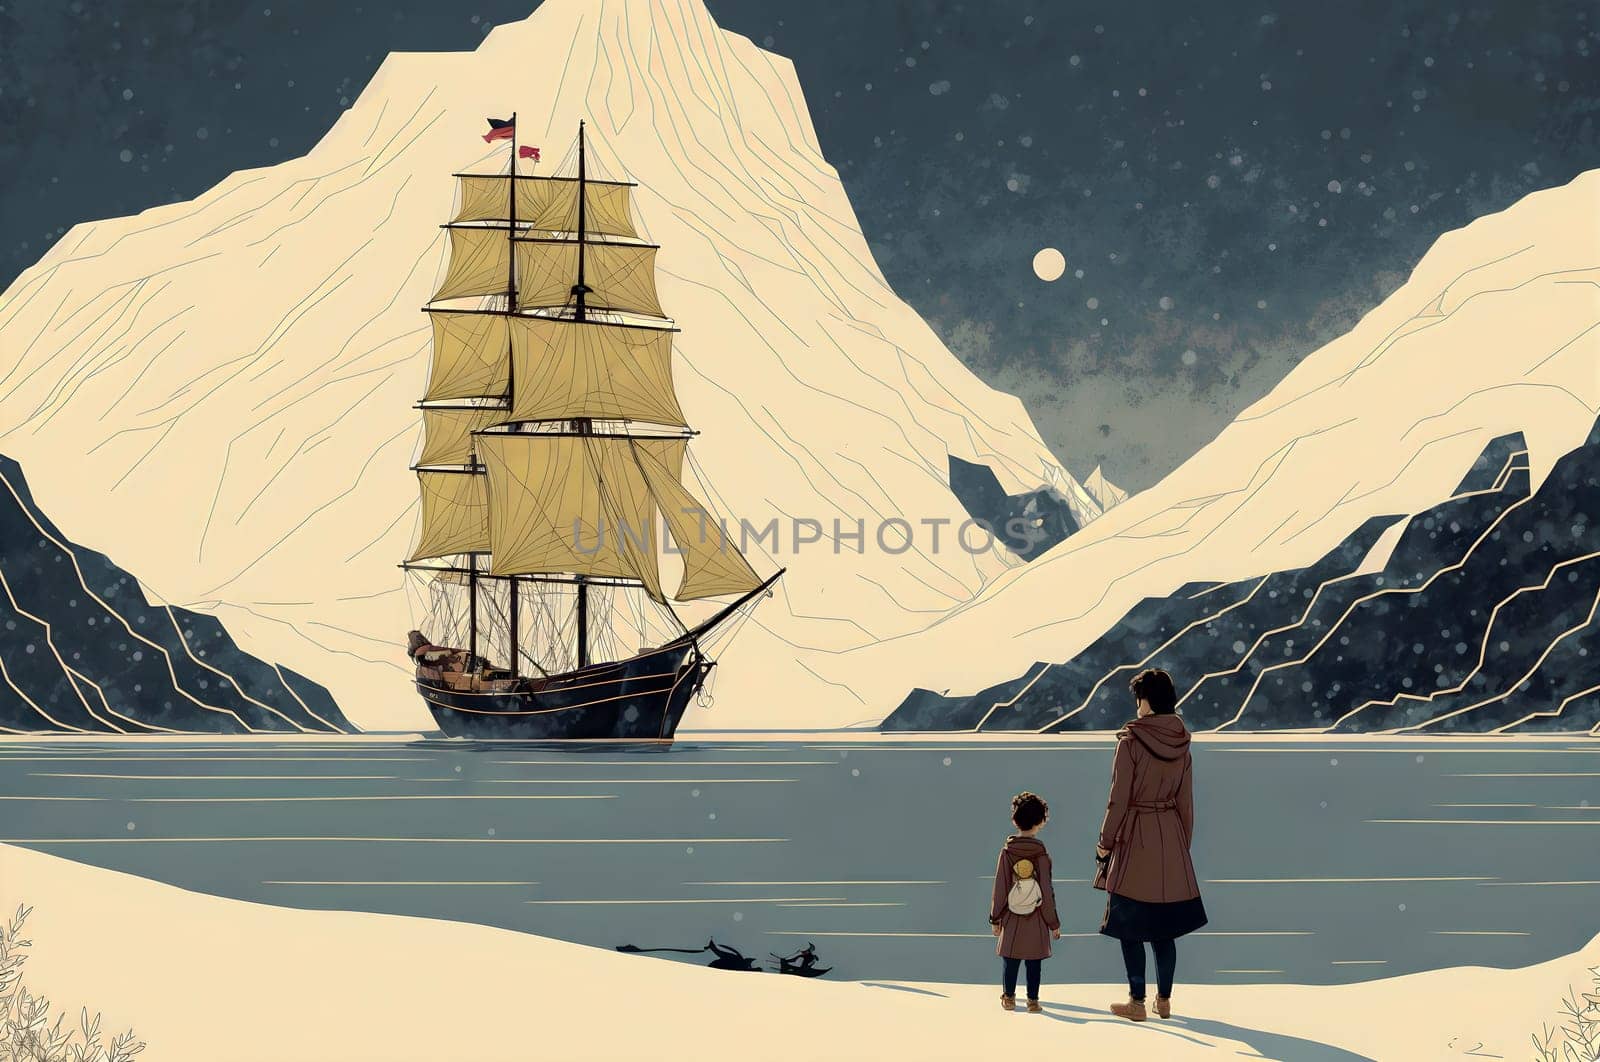 An illustration of a mother and child gazing at a sailing ship in a snowy arctic landscape